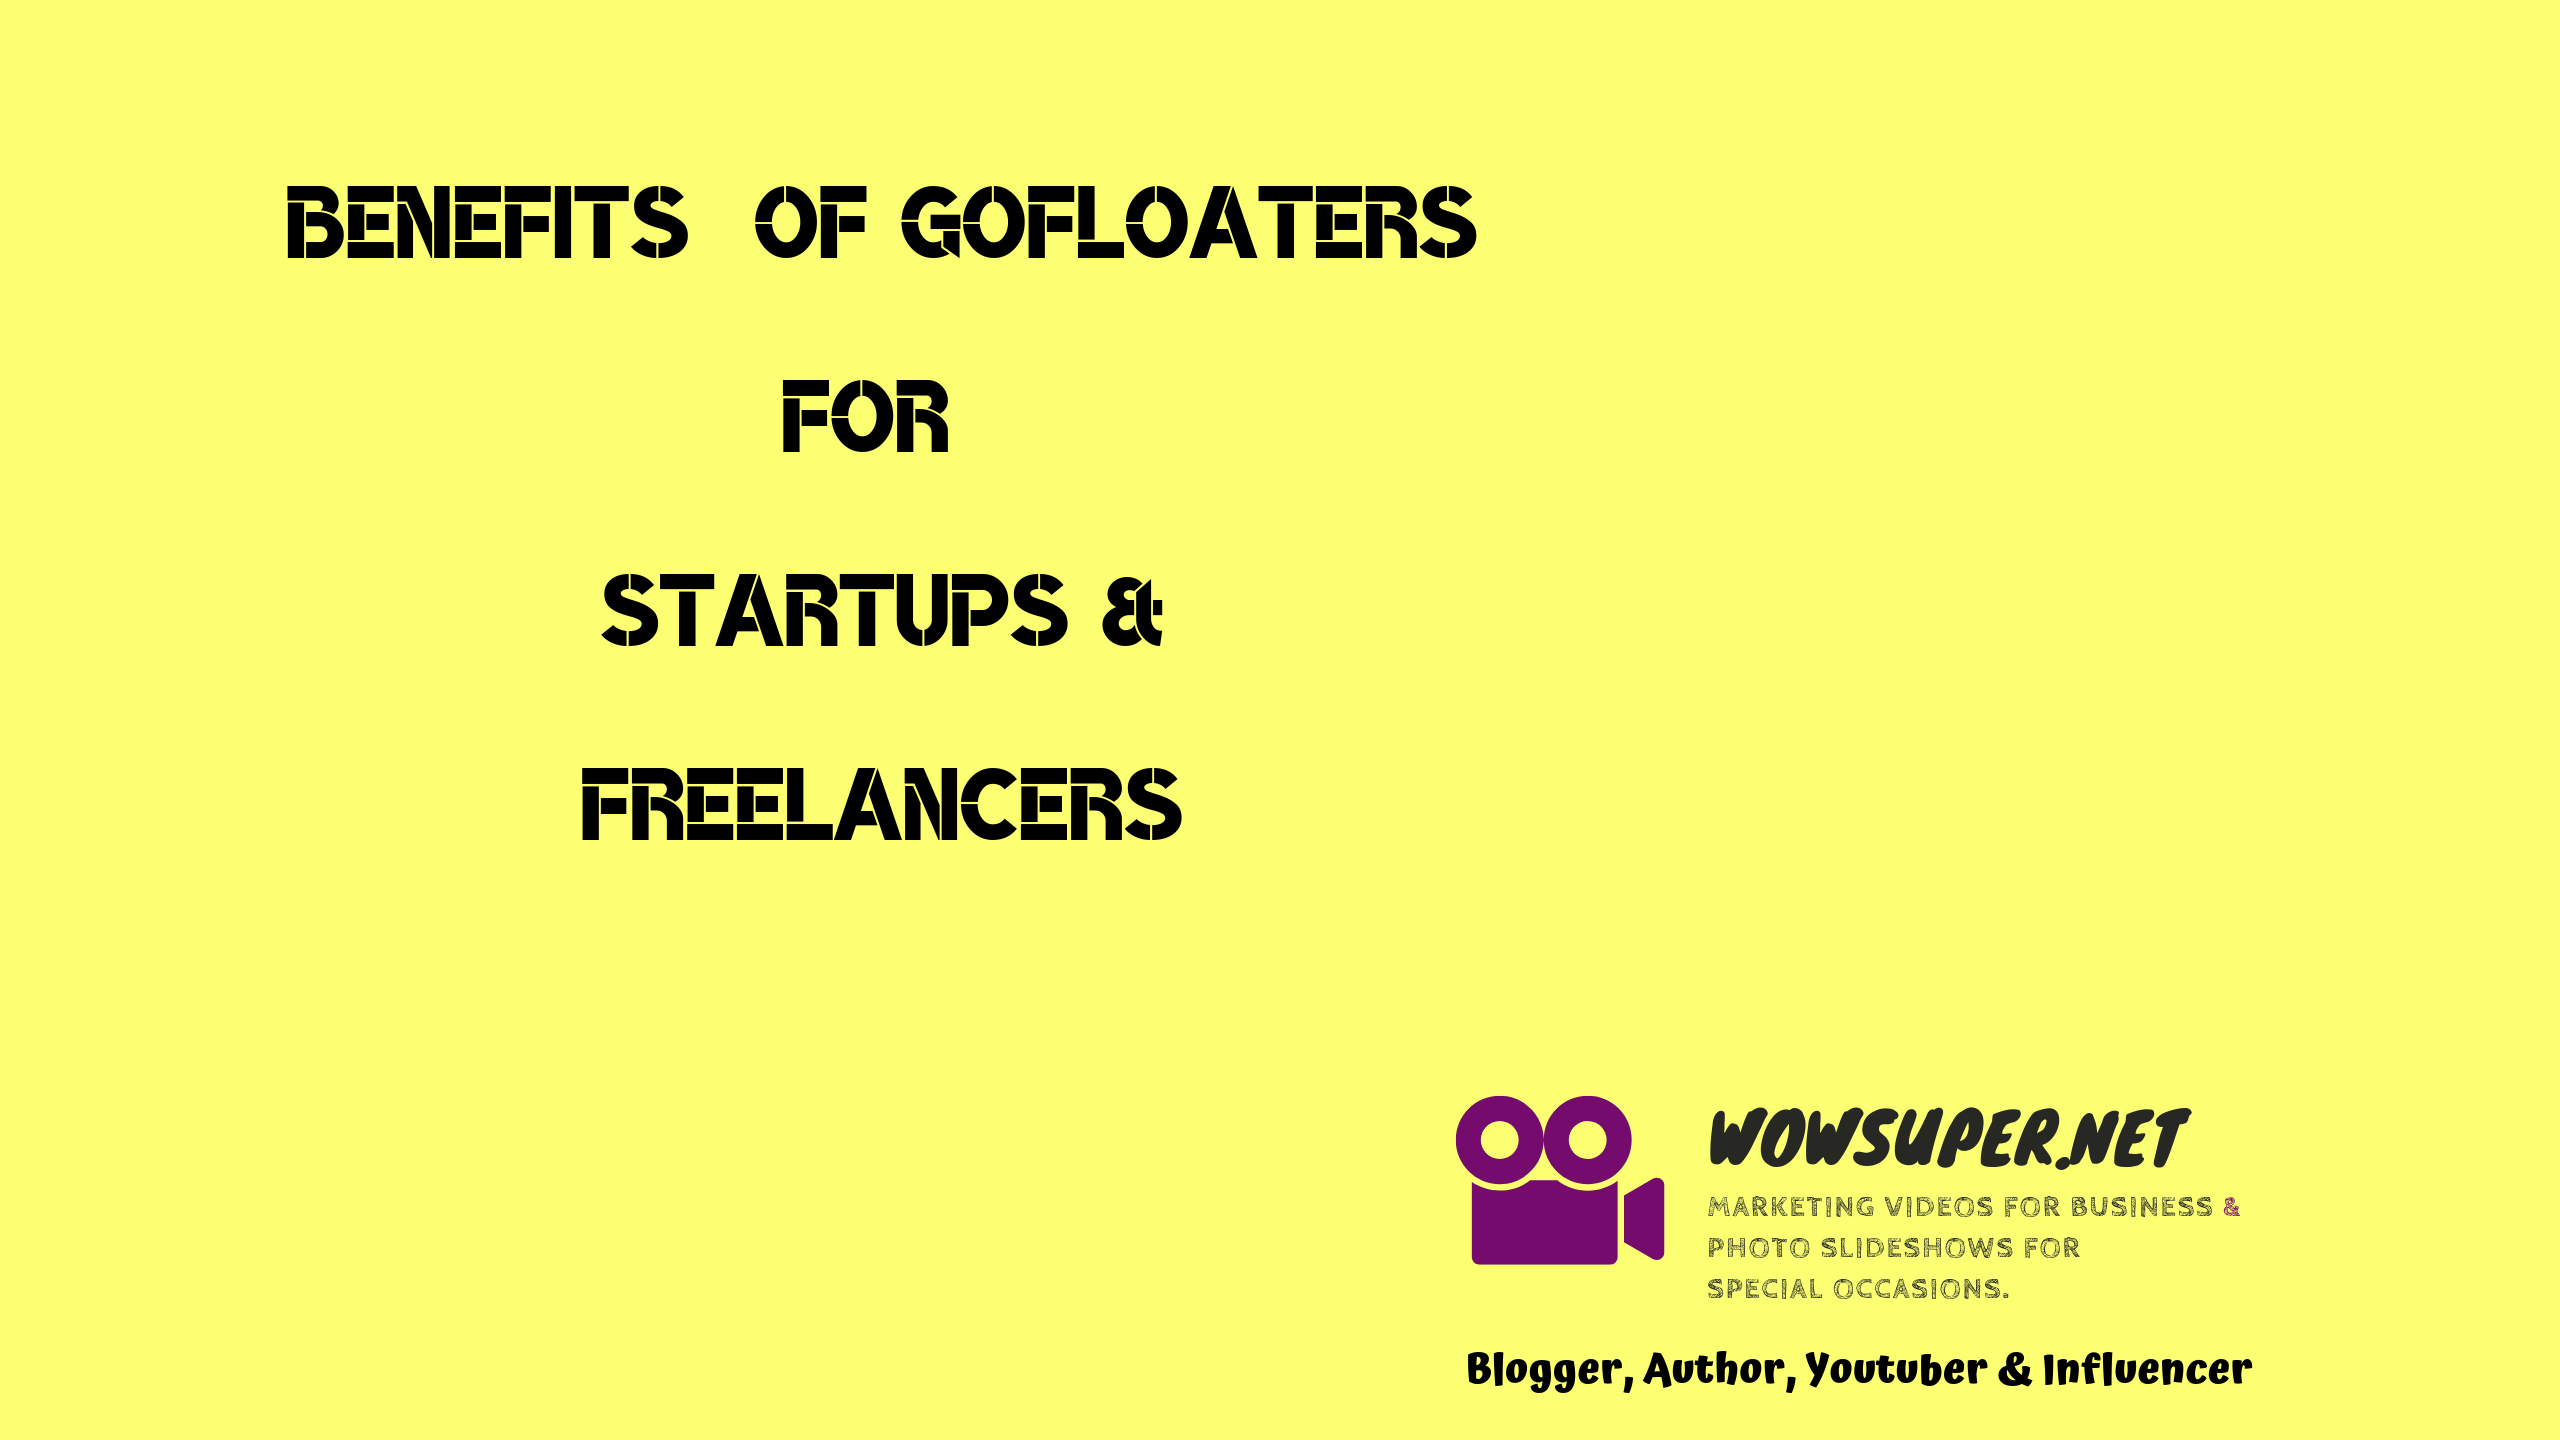 Benefits of gofloaters for startups & freelancers